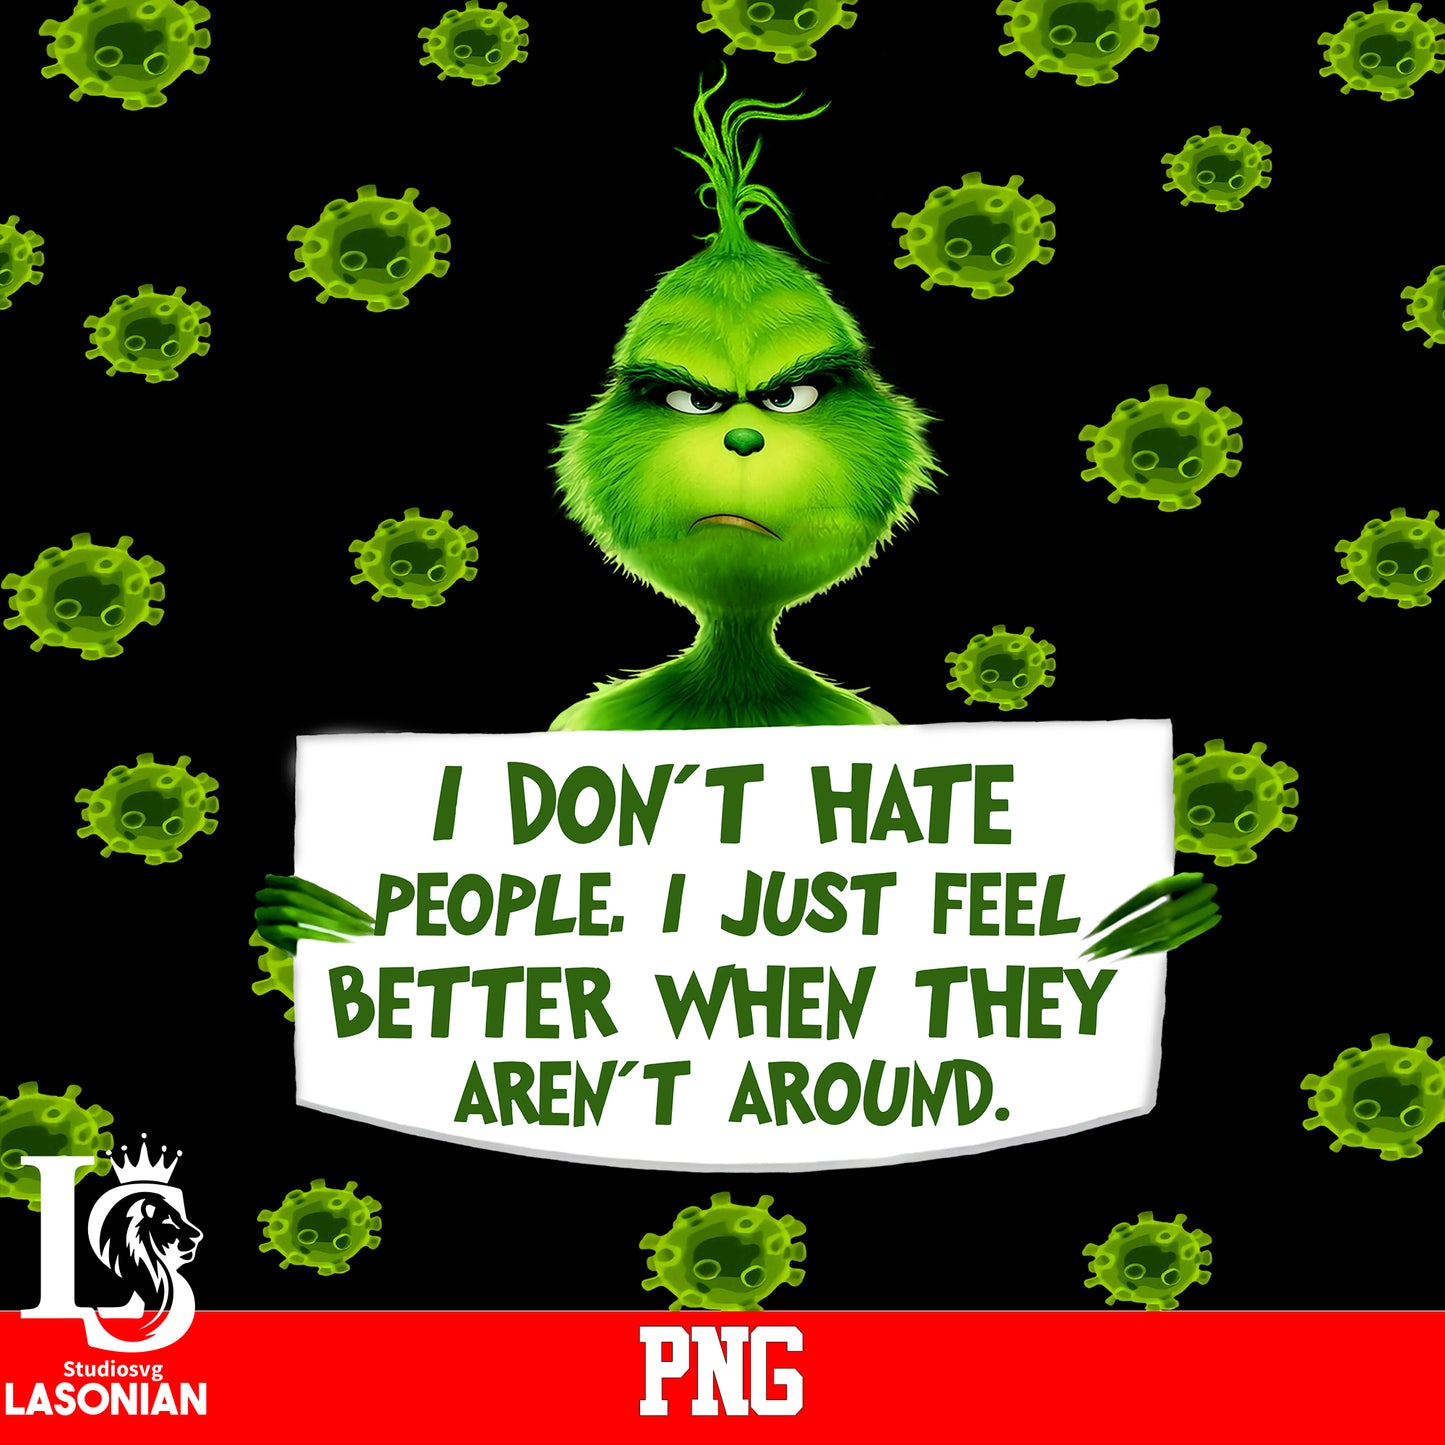 I Don't Hate People. I Just Feel Better When They Aren't Around PNG file